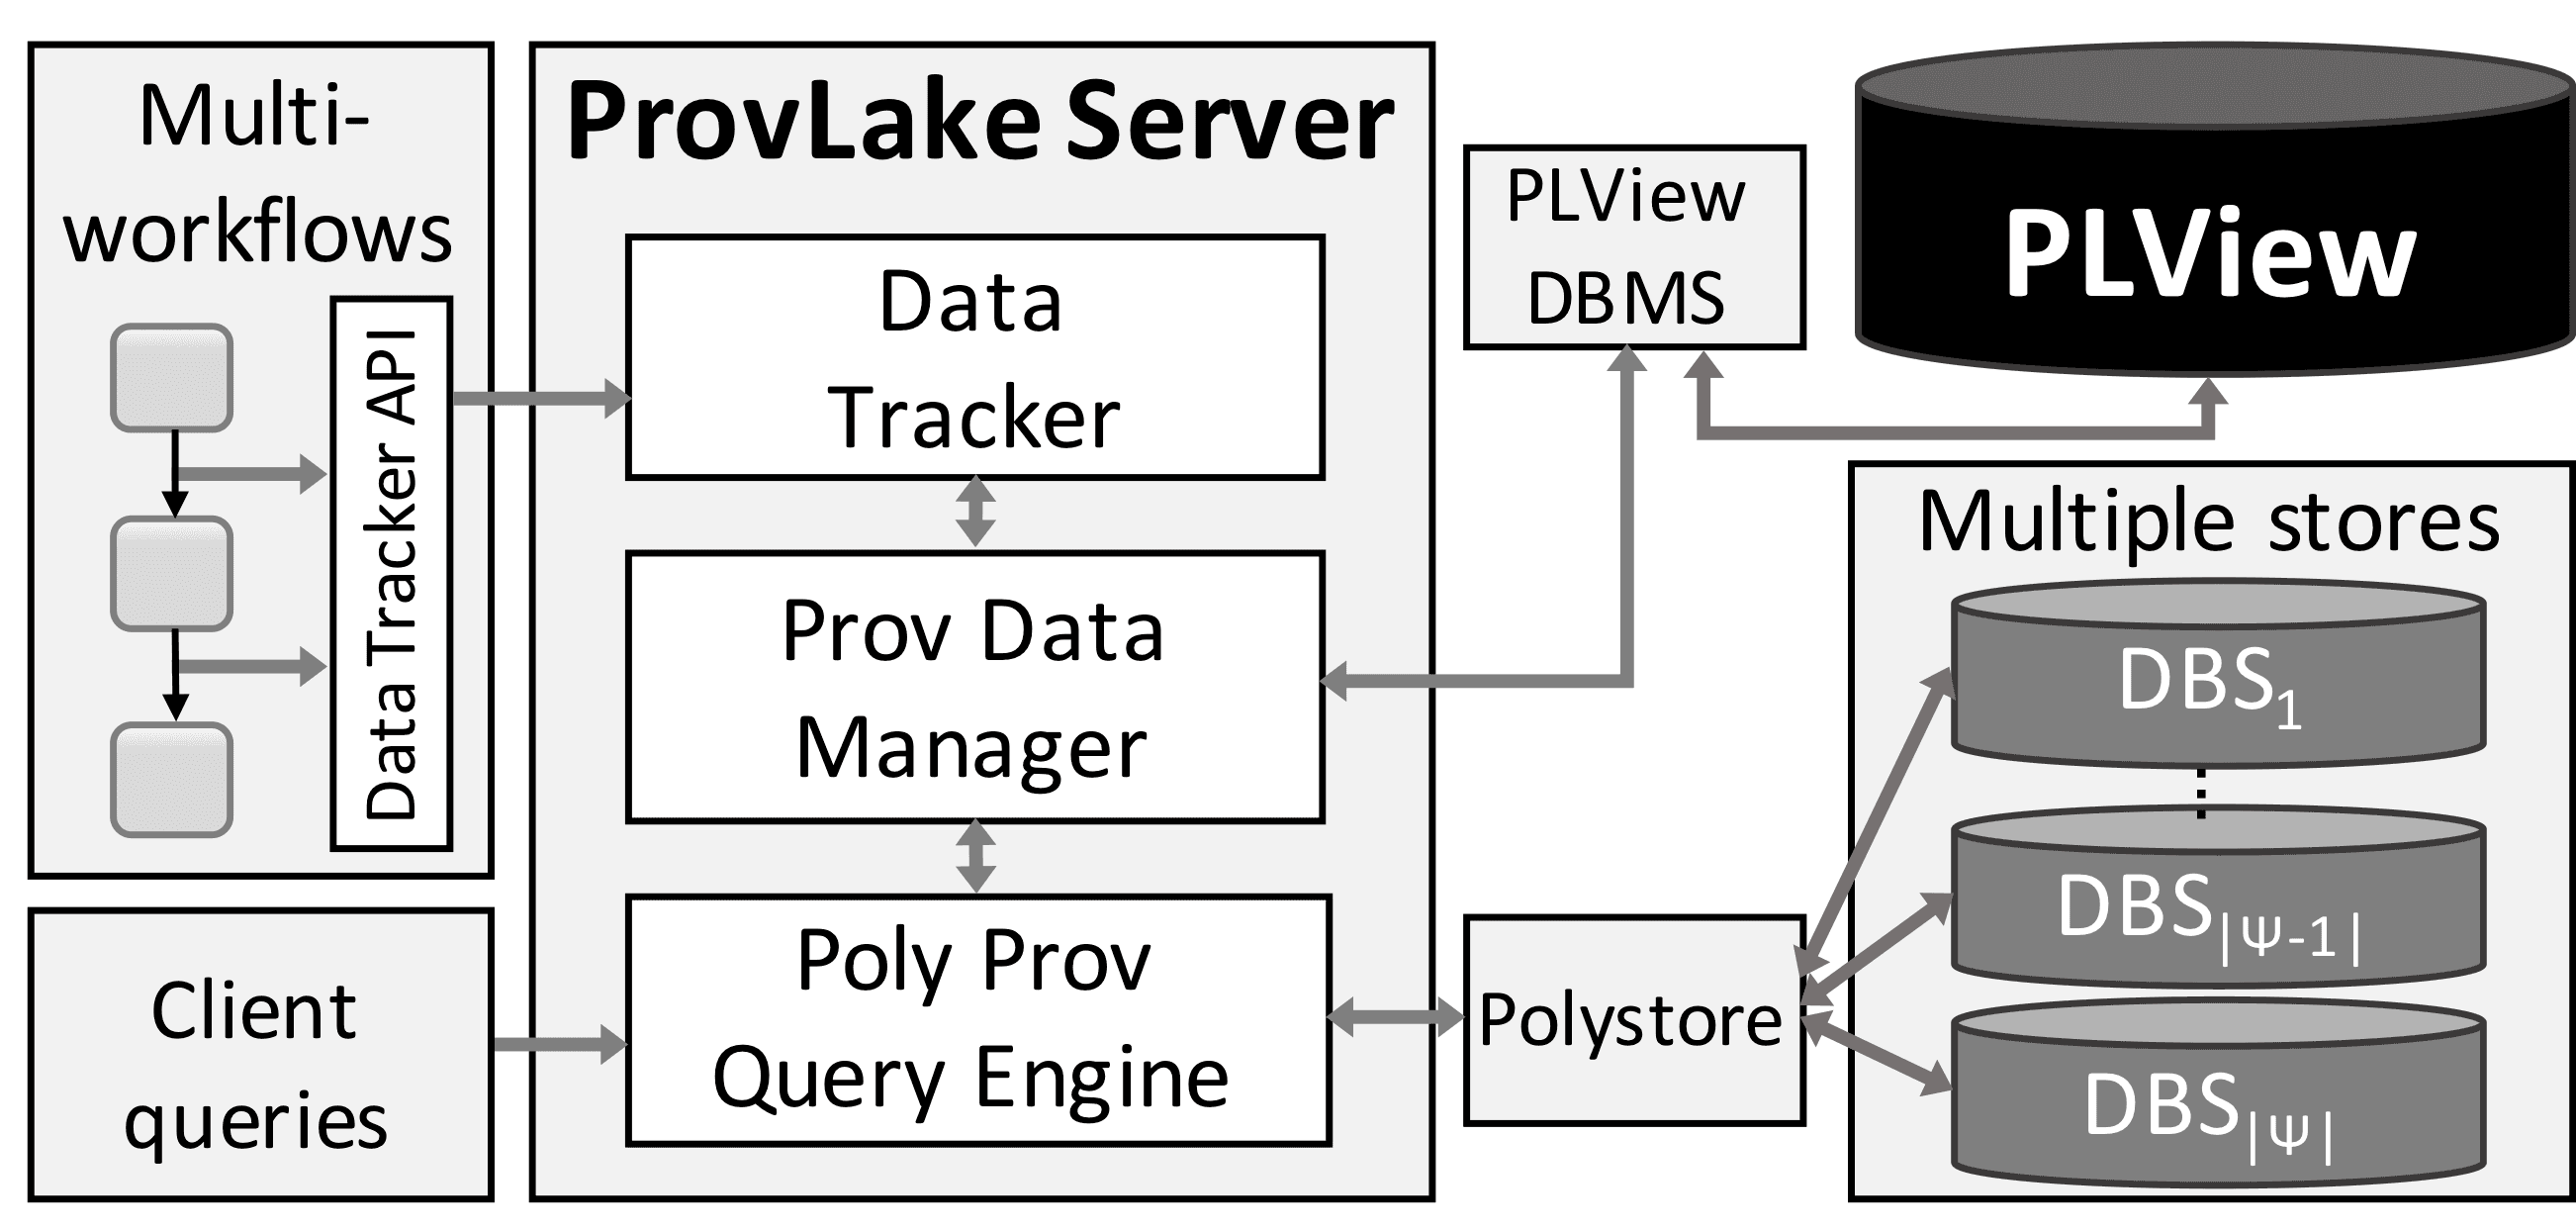 architecture diagram of the provlak system, described in the text.